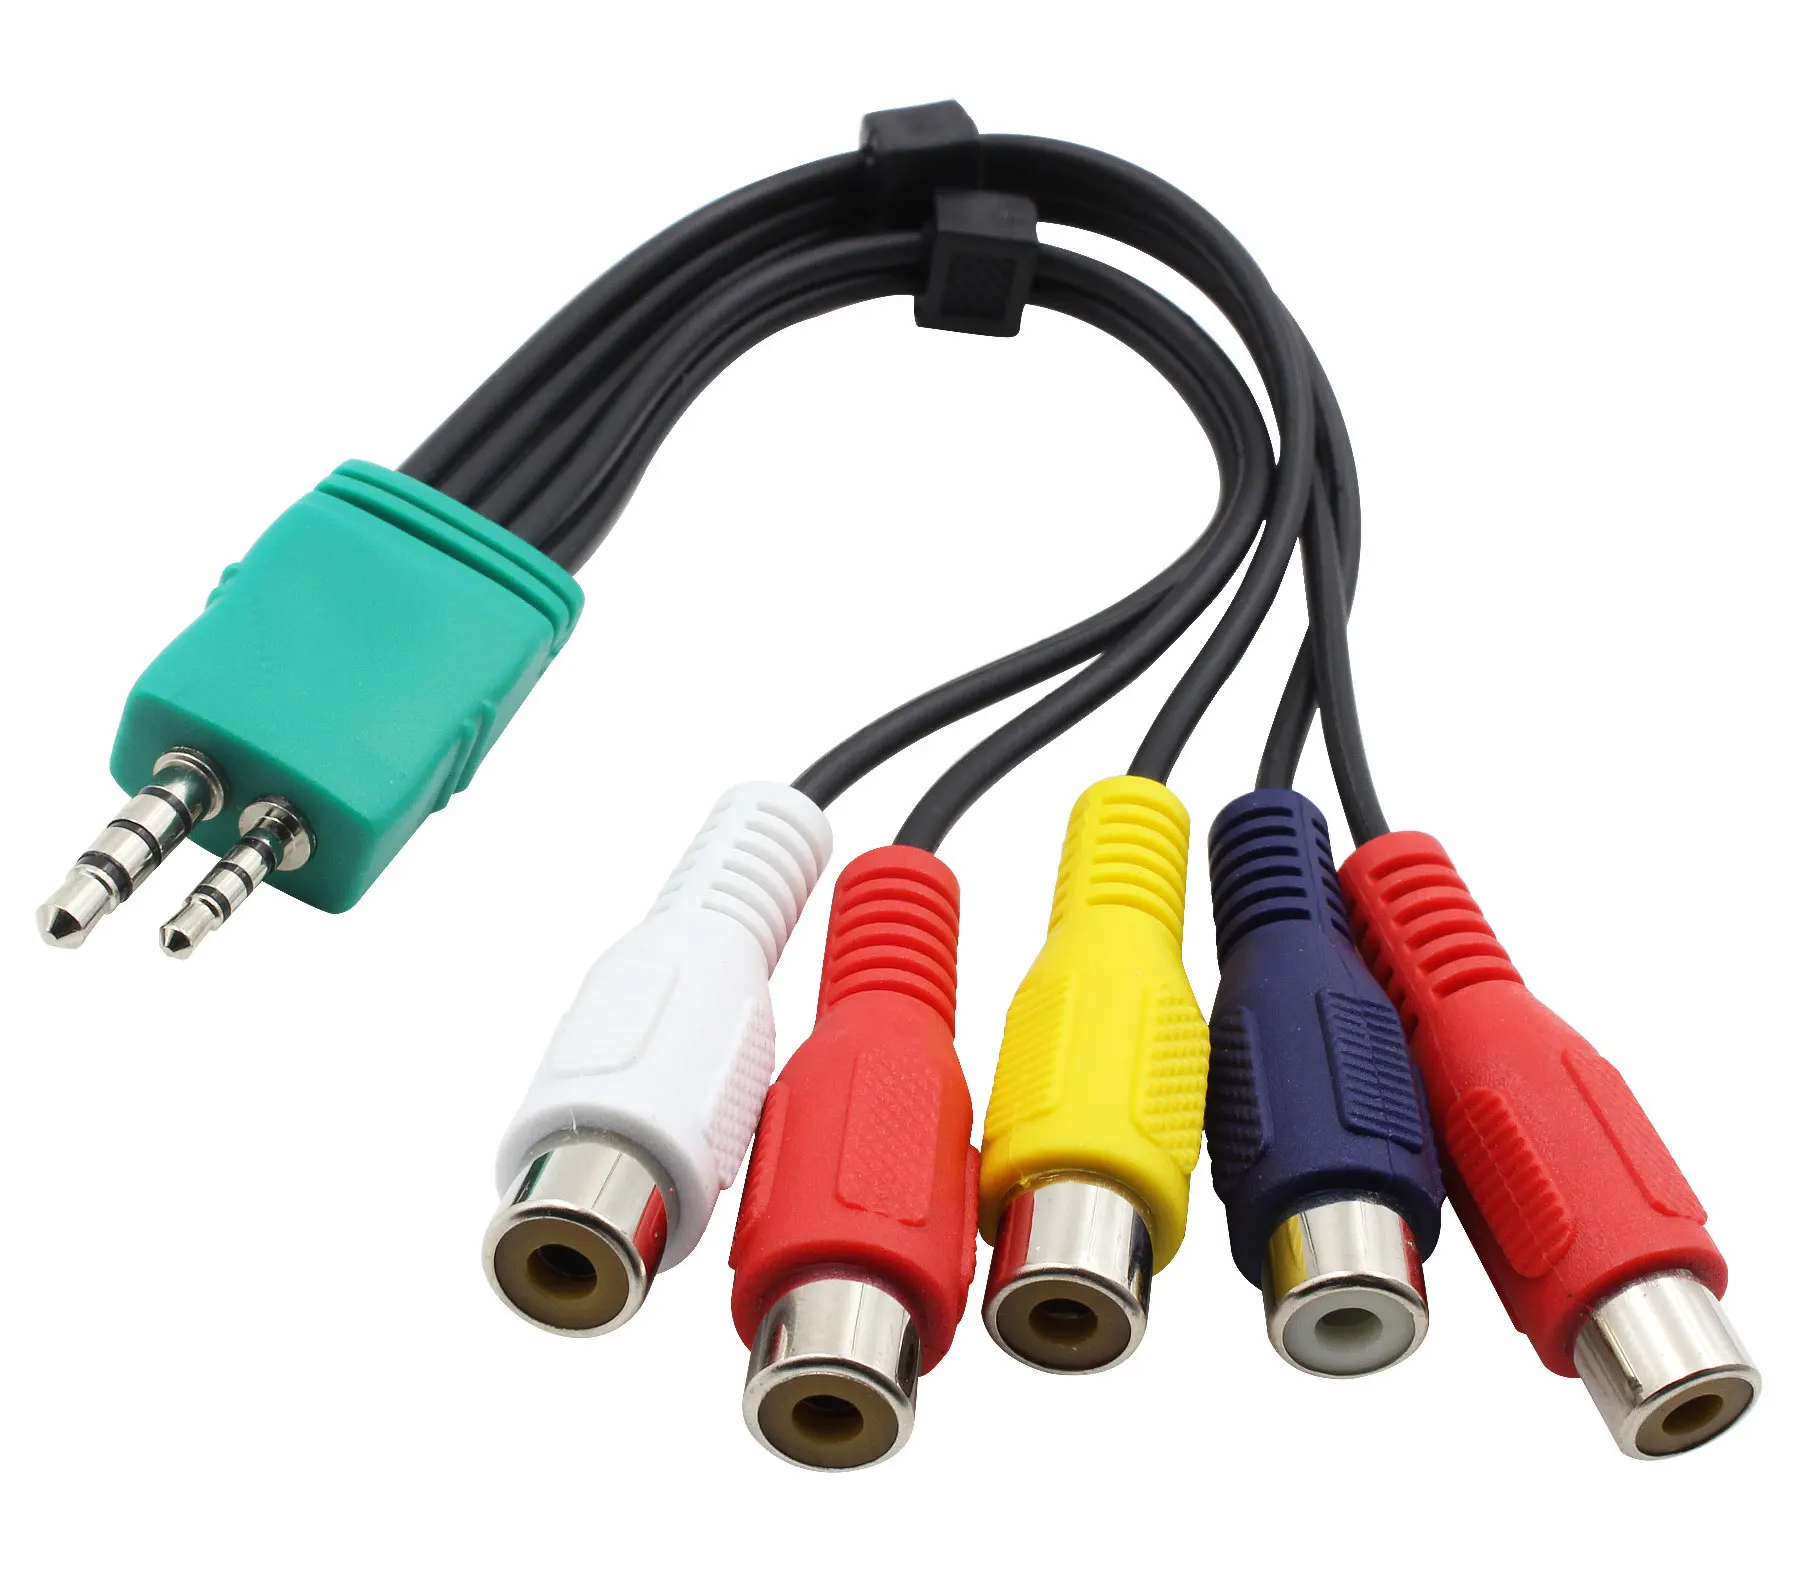 Audio Video Av Cable For Samsung Led Tv Ue55d6300 Ue40d6530wsxzg - Data Cables - AliExpress